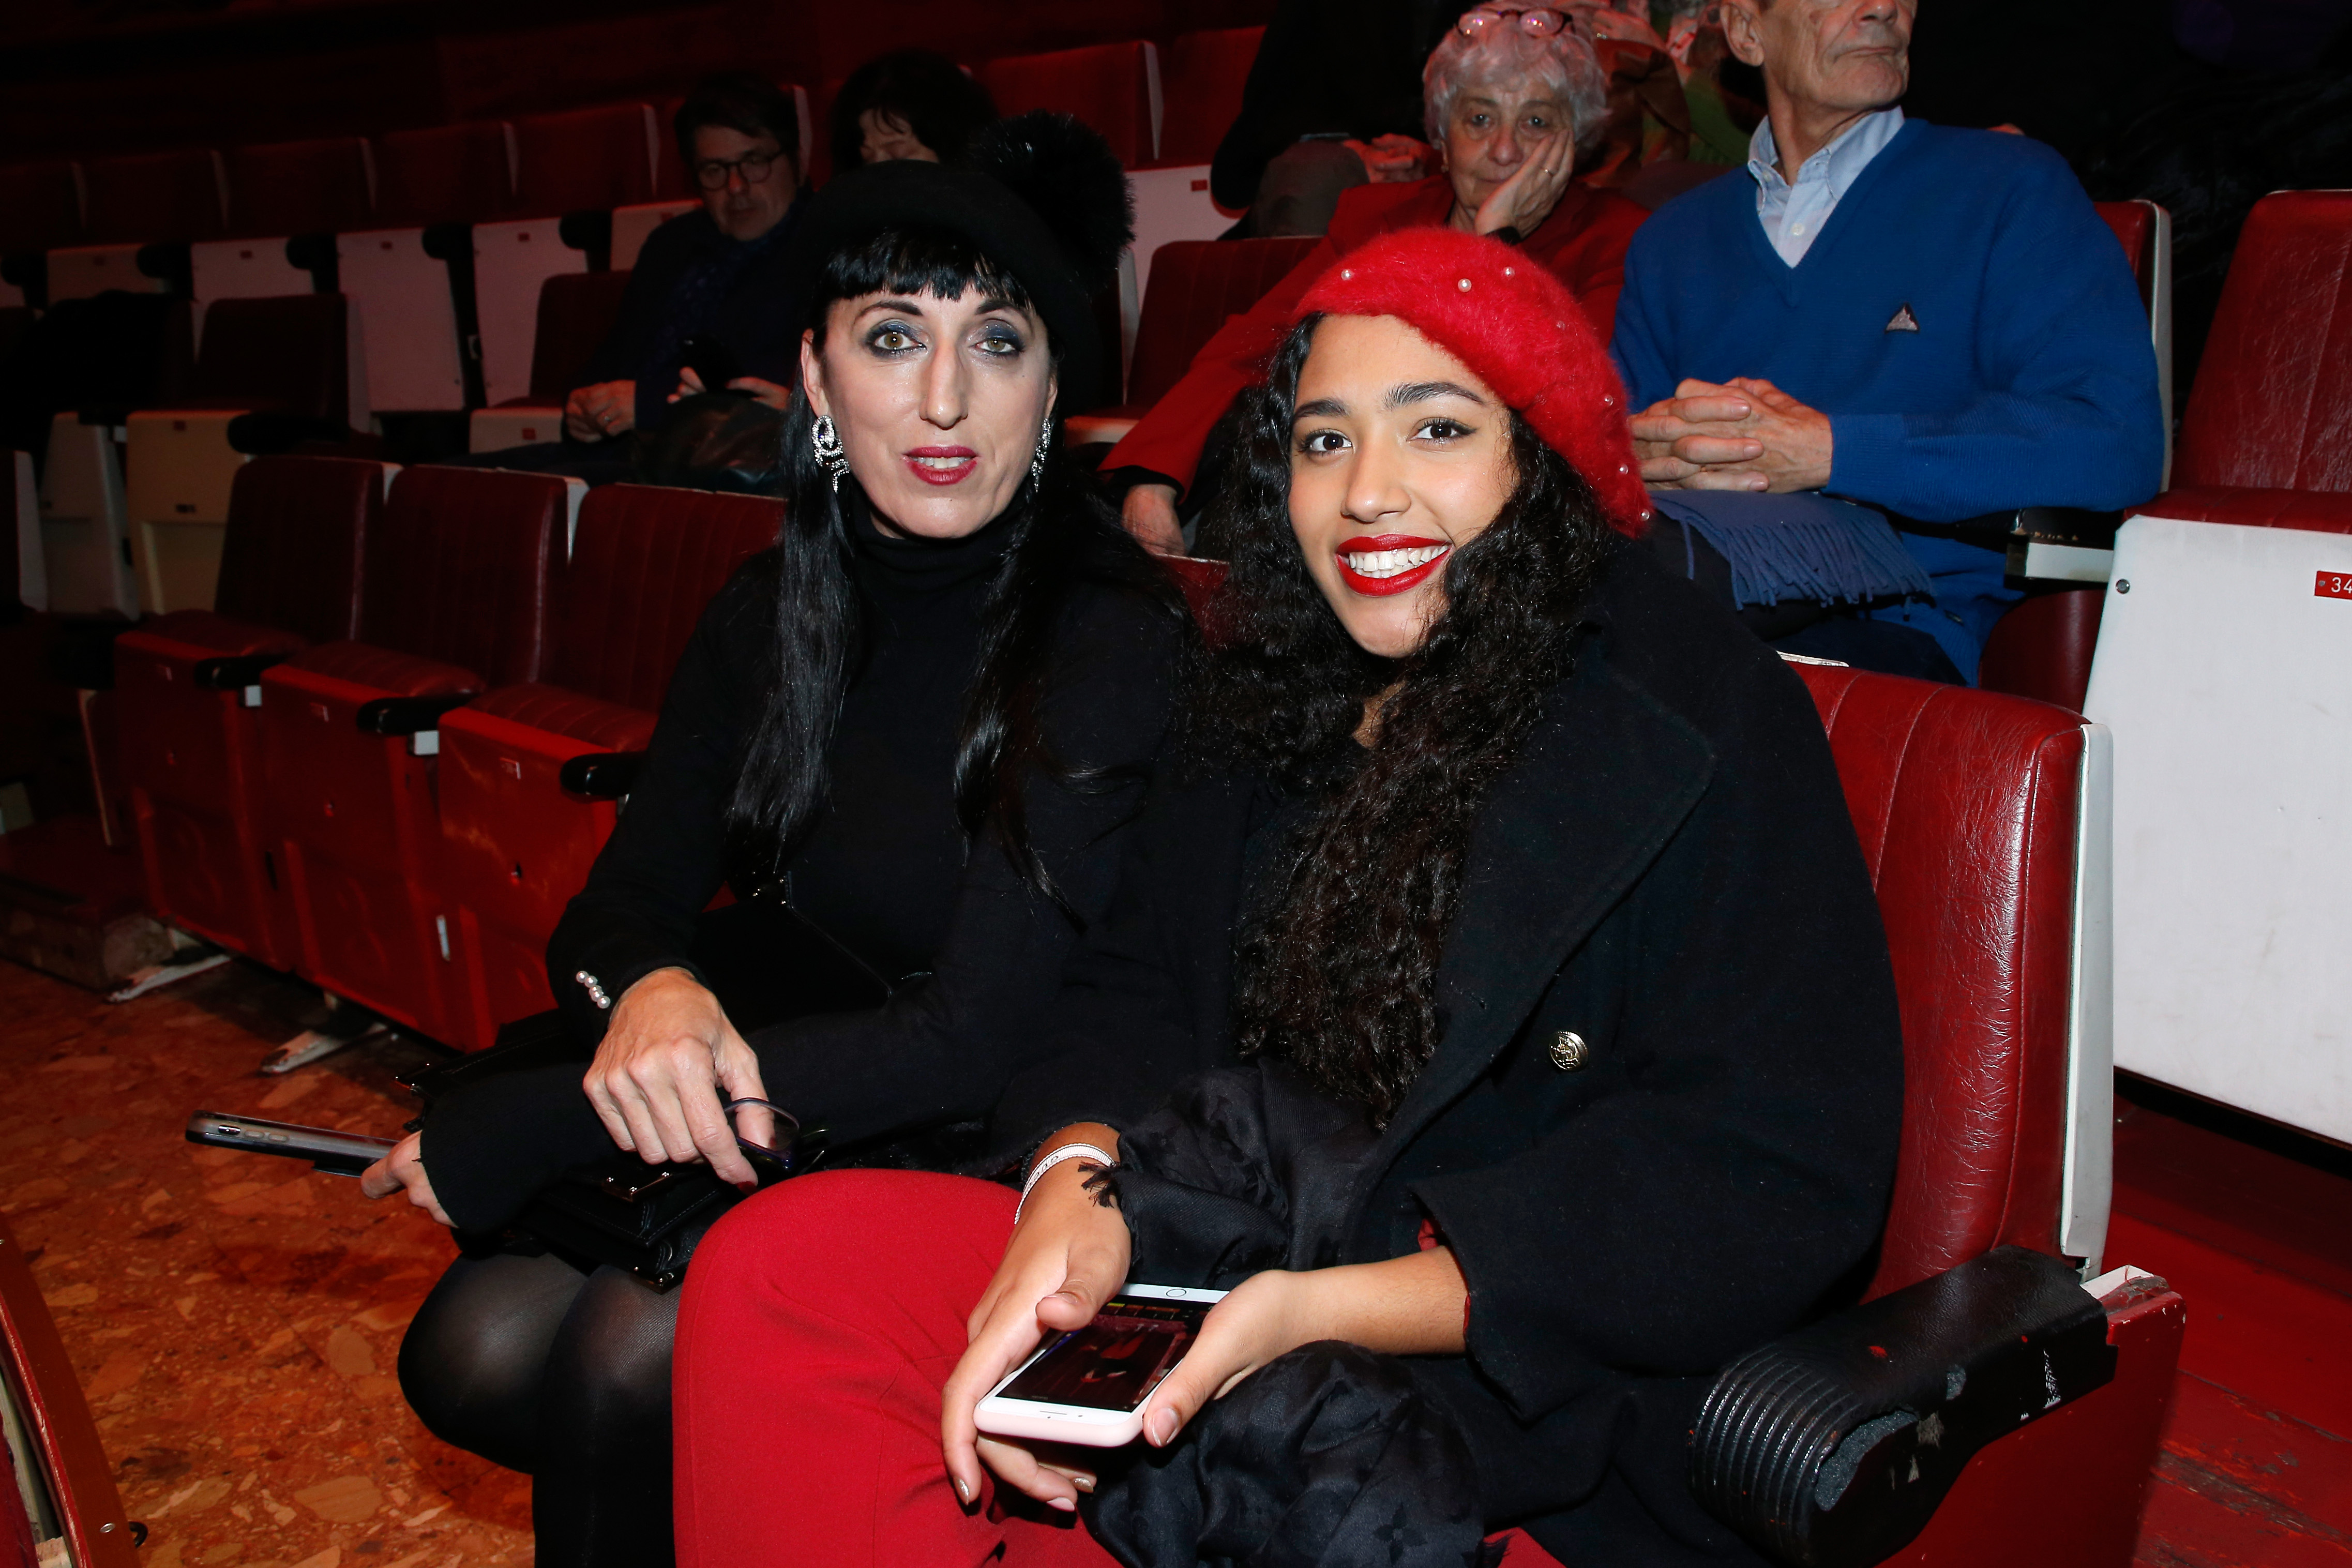 Rossy de Palma and Luna Garcia at the "Depardieu Chante Barbara" at "Le Cirque D'Hiver" on November 14, 2017, in Paris, France | Source: Getty Images